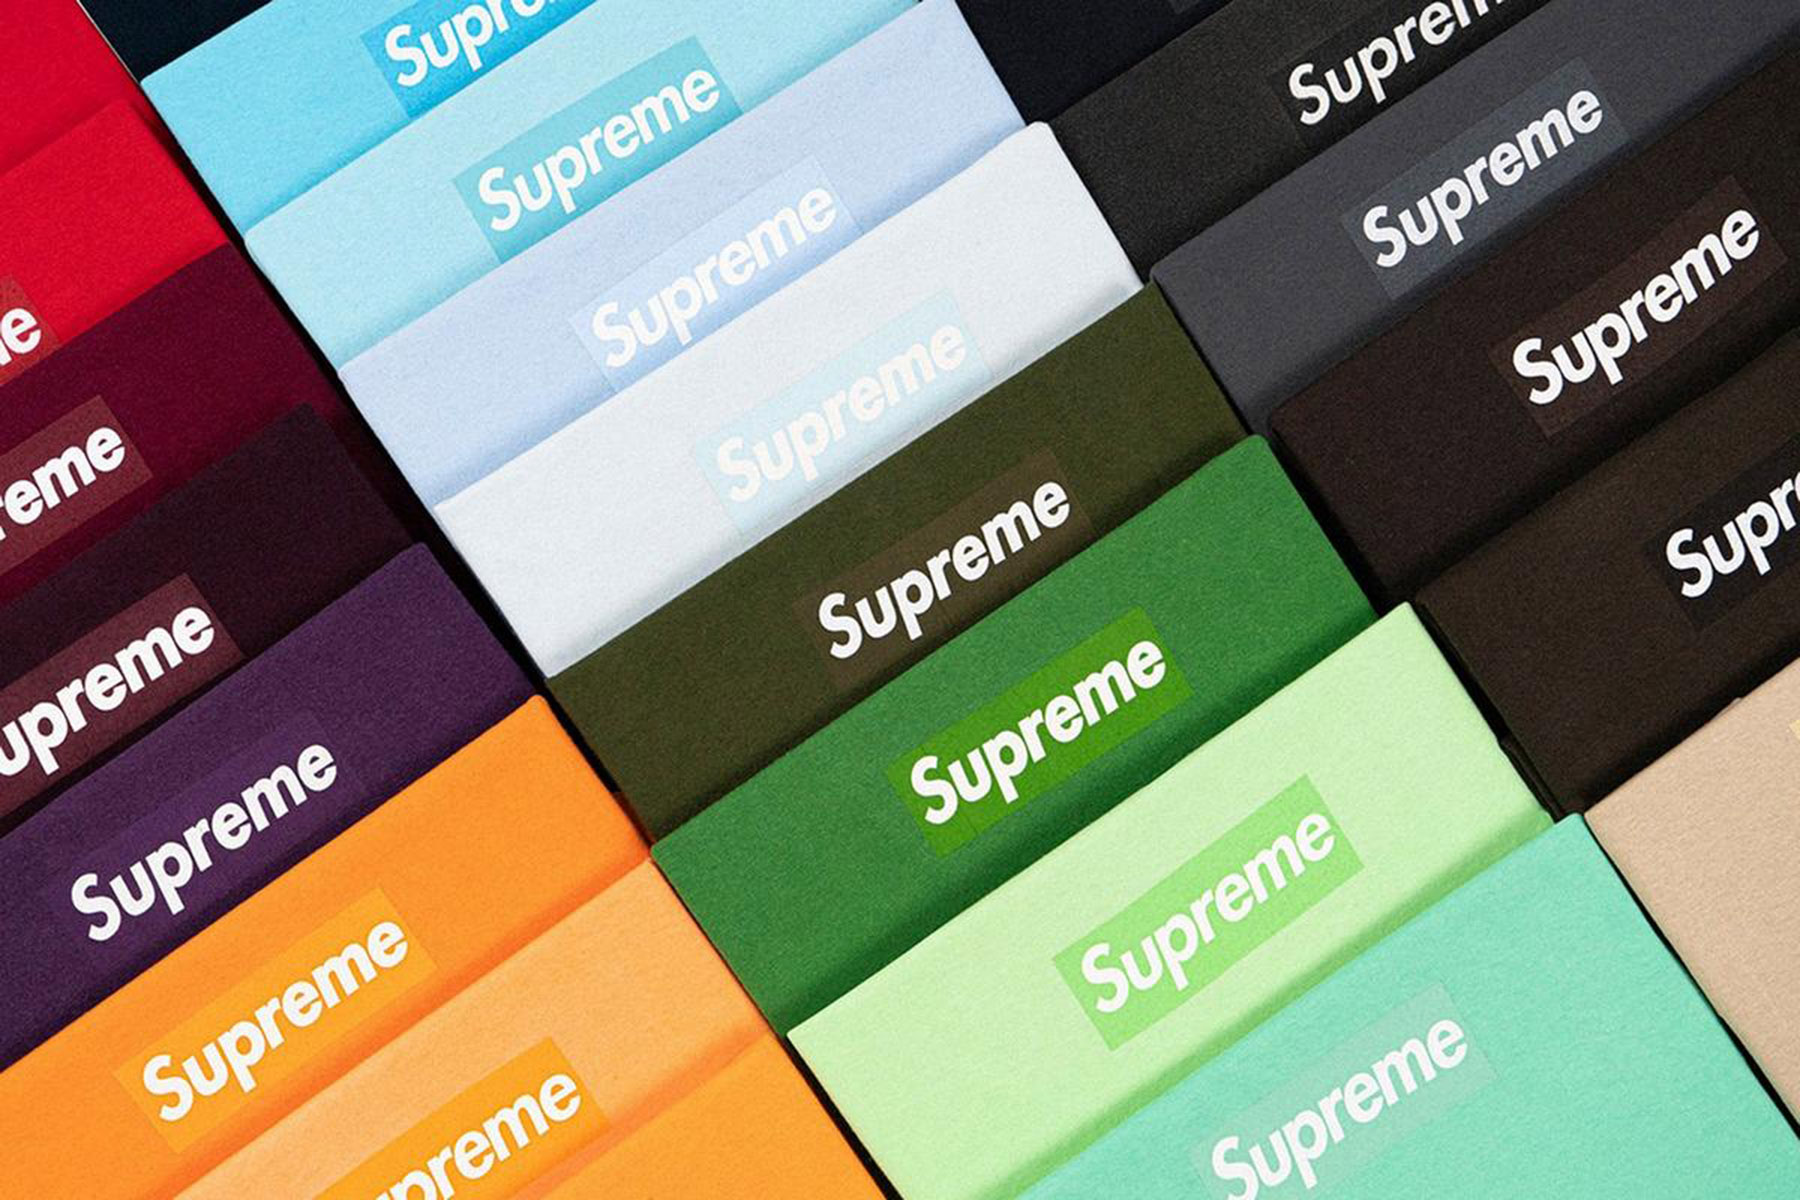 Christies is auctioning every Supreme Box Logo tee sold since 1994 